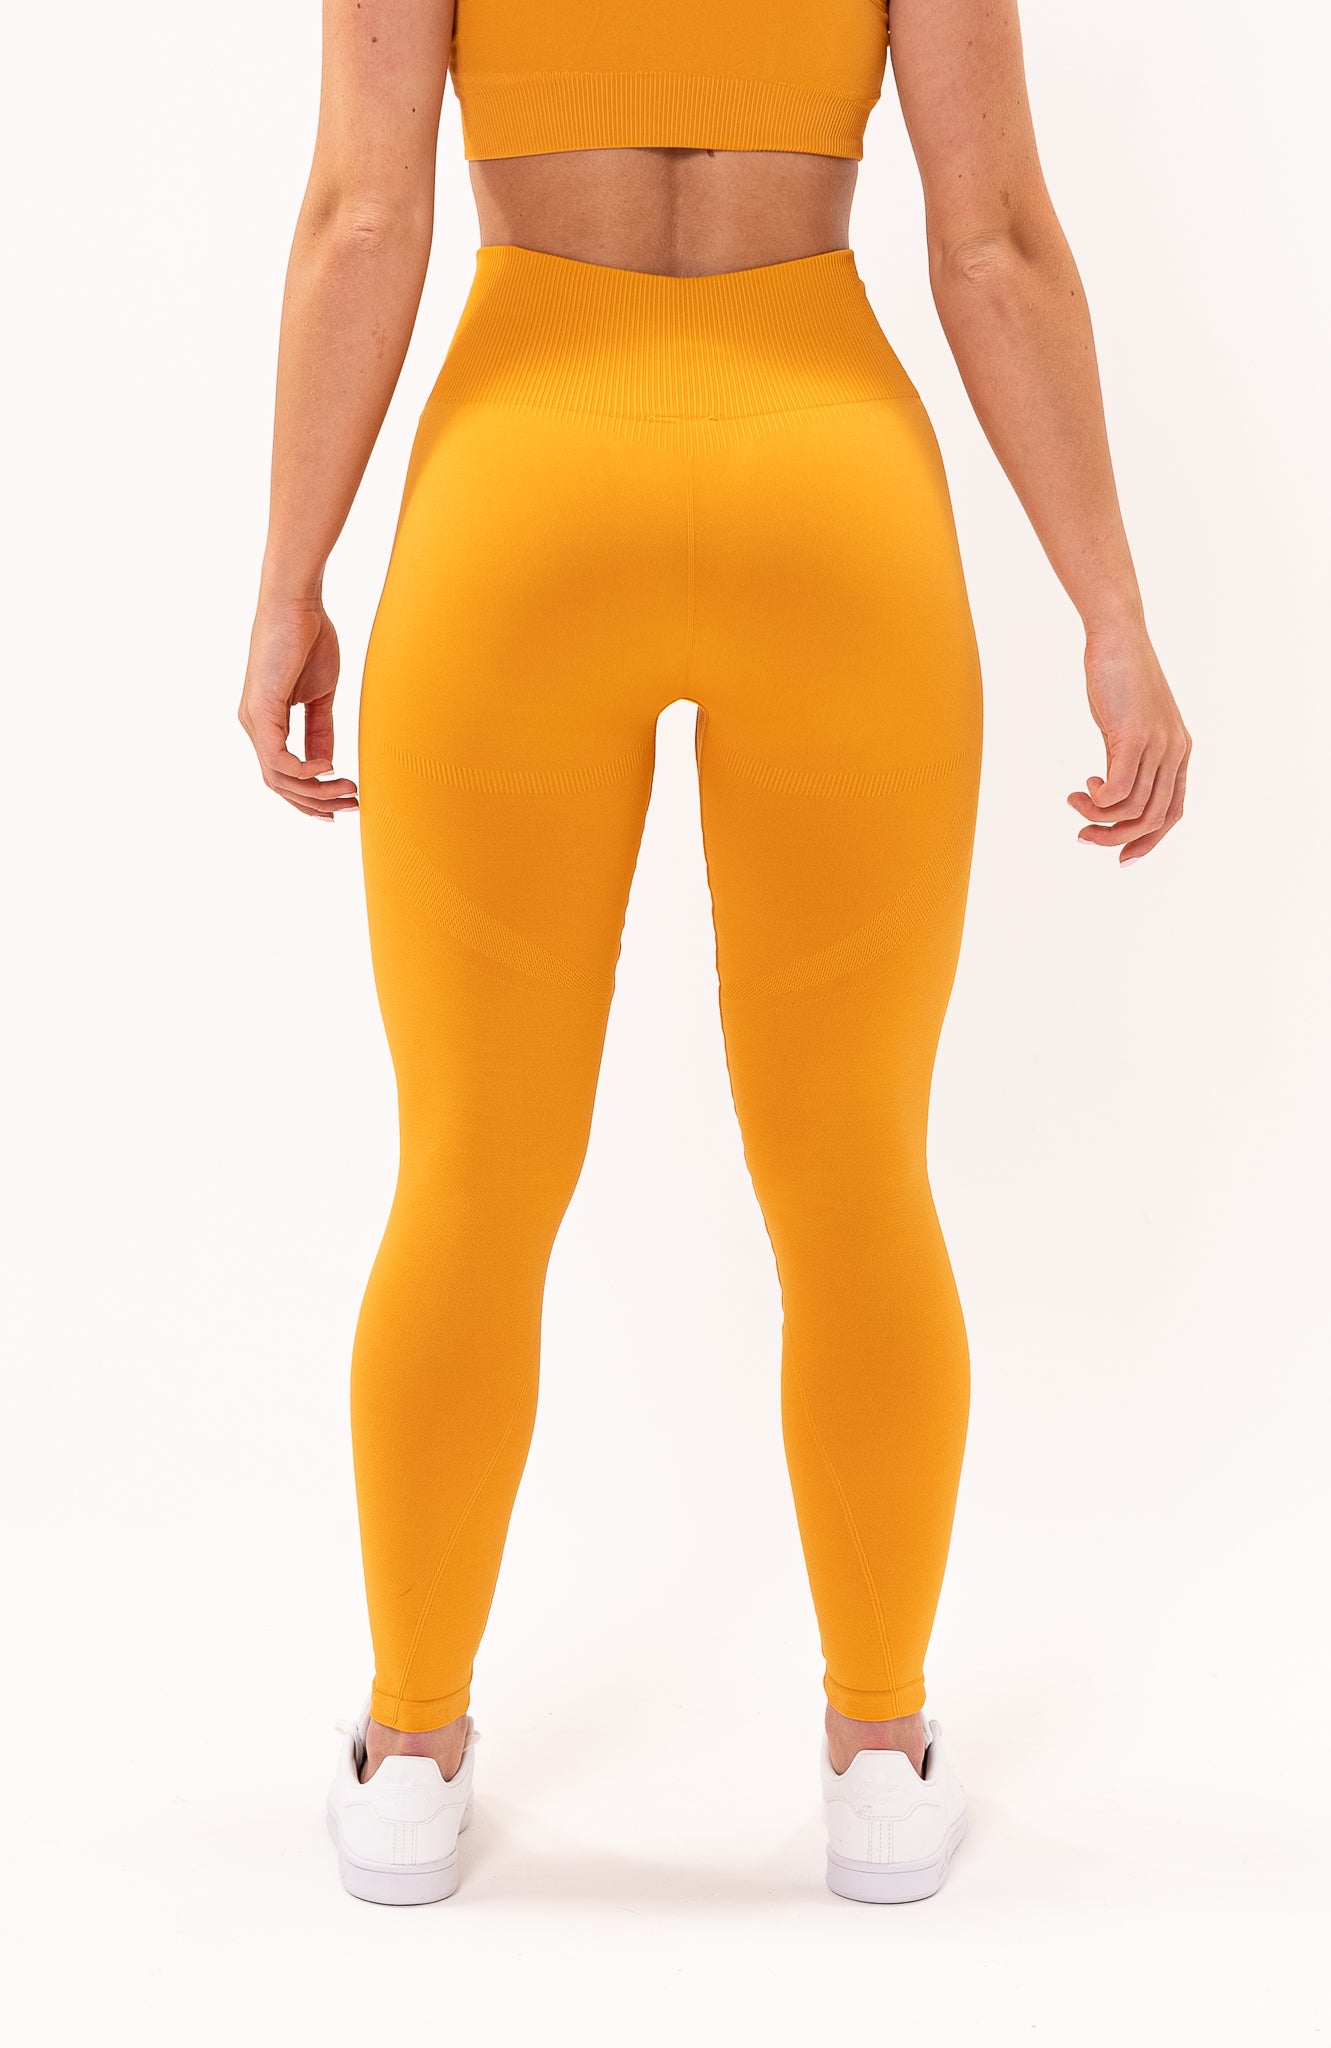 redbaysand Women's seamless Limitless bum shaping, high waisted leggings in orange – Squat proof sports tights for Gym workouts training, Running, yoga, bodybuilding and bikini fitness.